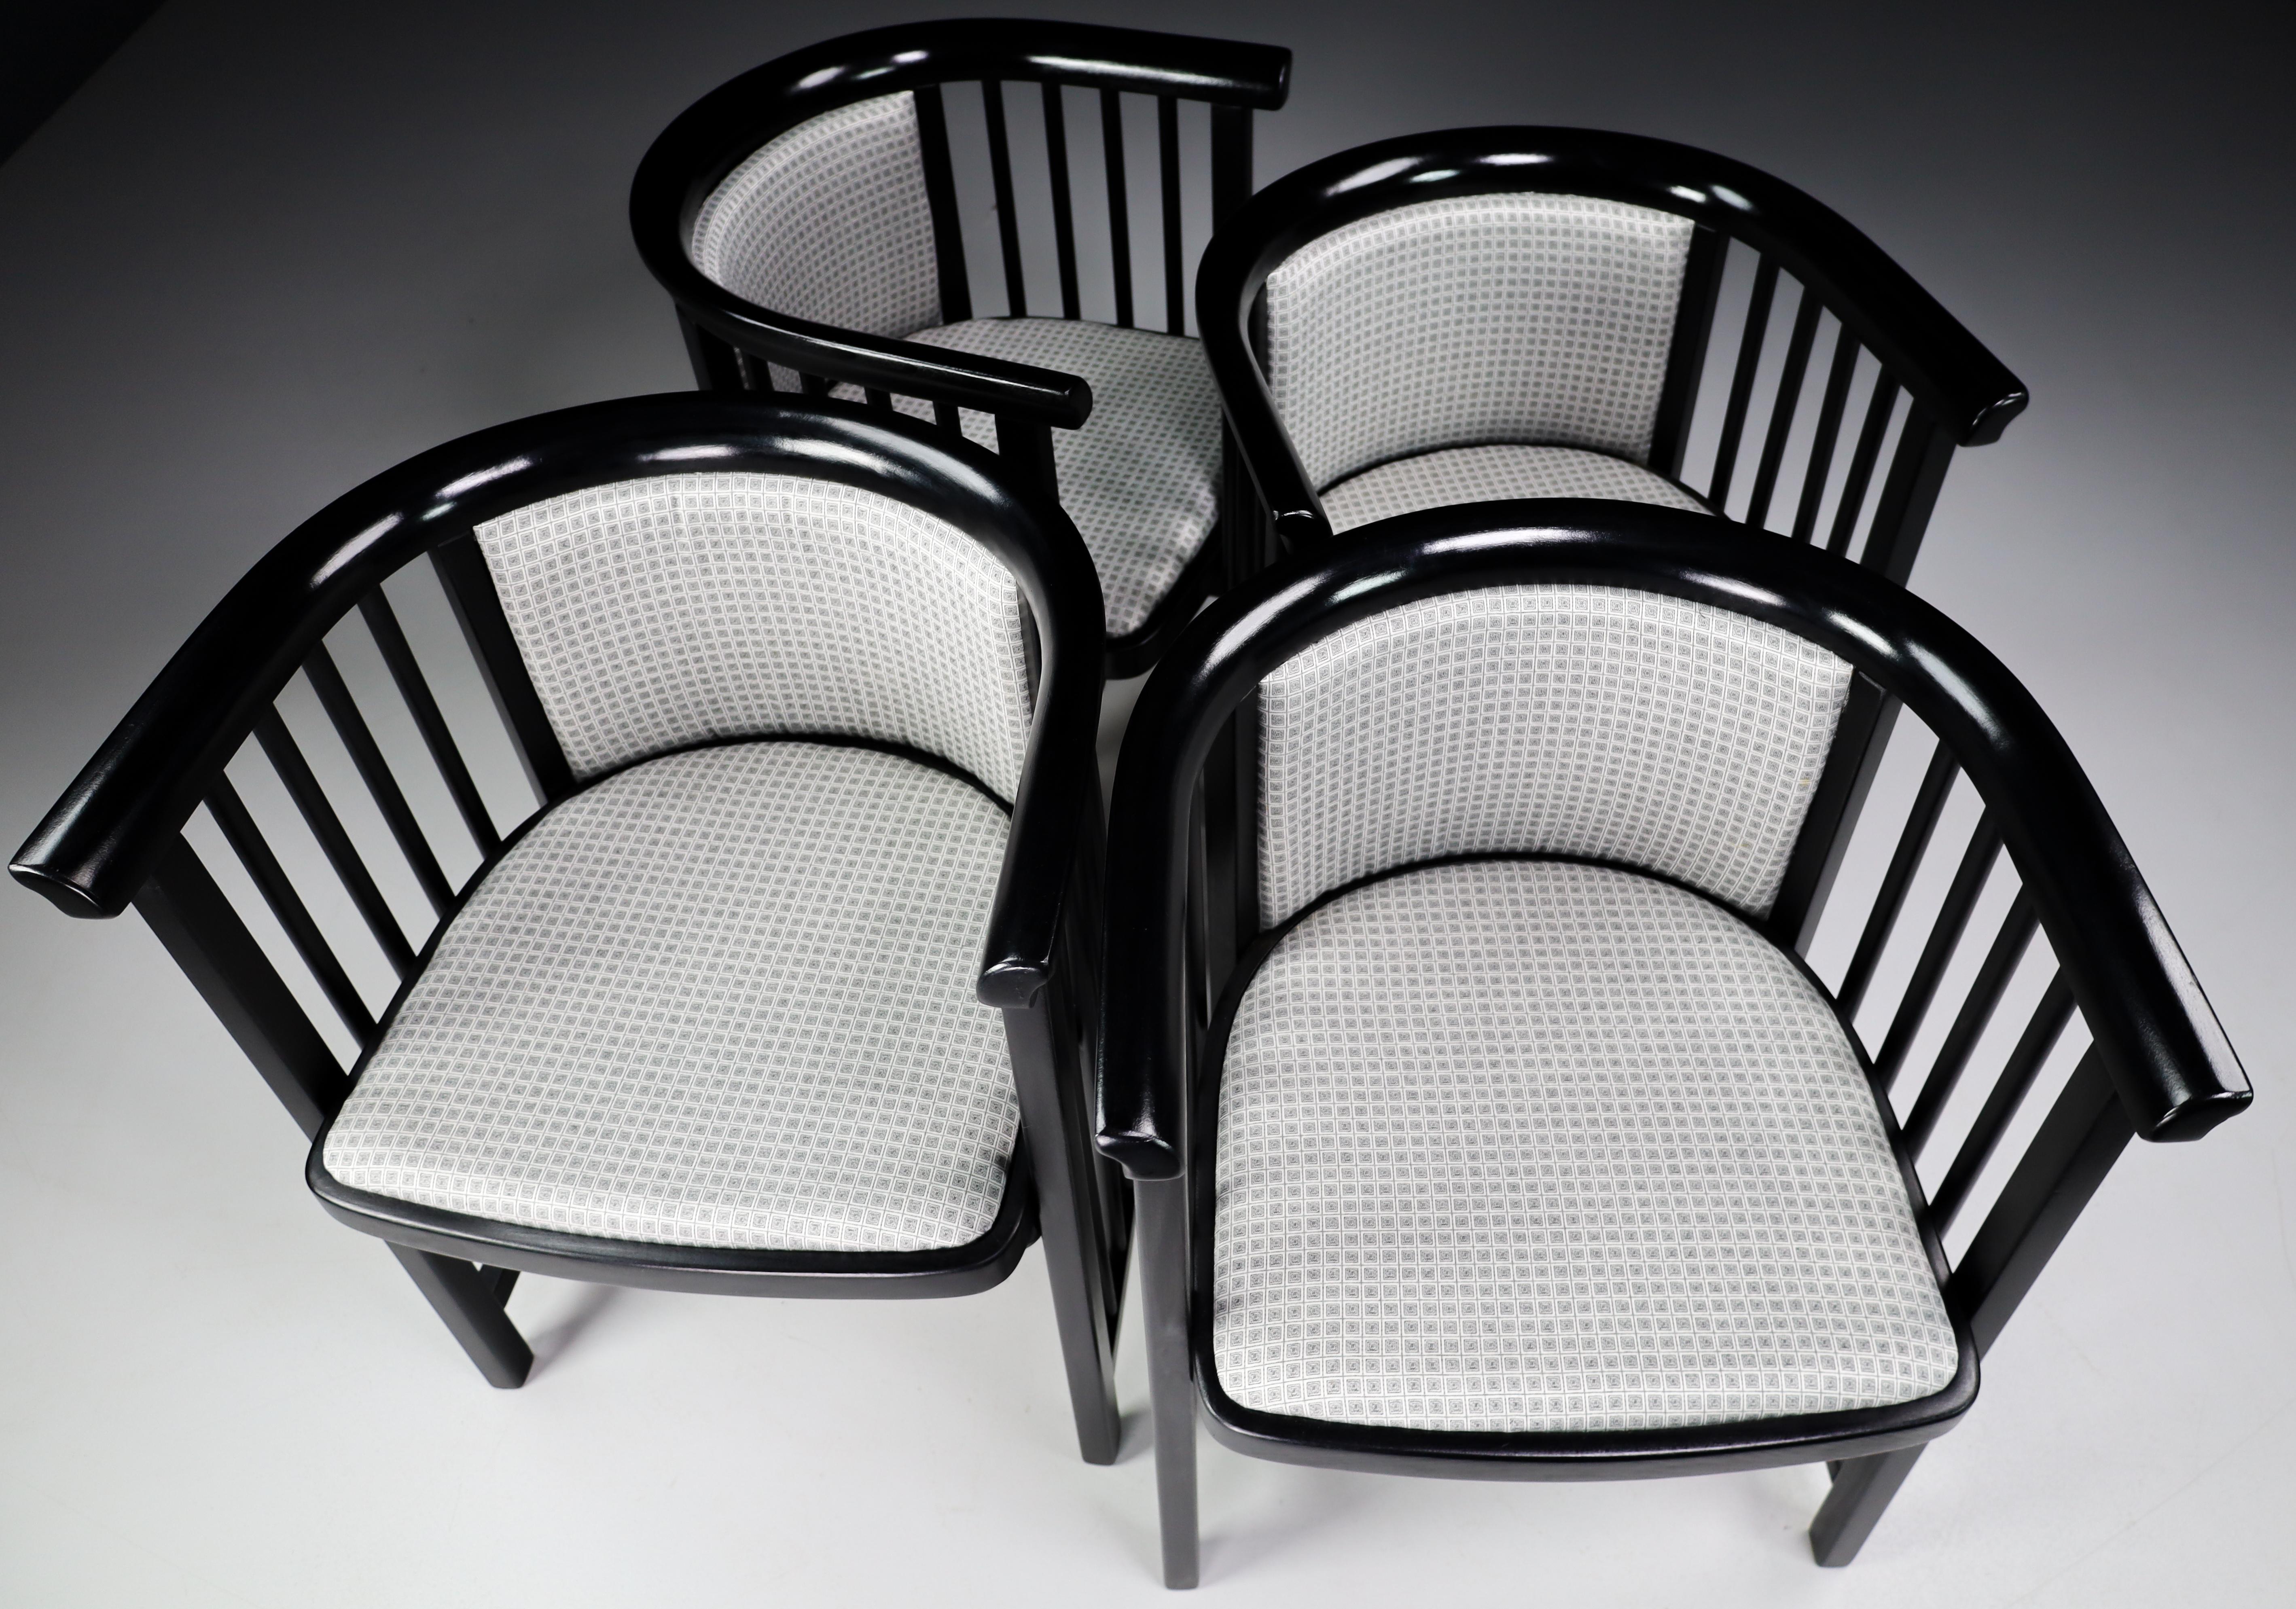 Set of Four restored Vienna Secession armchairs in black bentwood with grey fabric upholstery designed by Josef Hoffmann, Austria 1930s . These armchairs would make an eye-catching addition to any interior such as living room, family room, screening